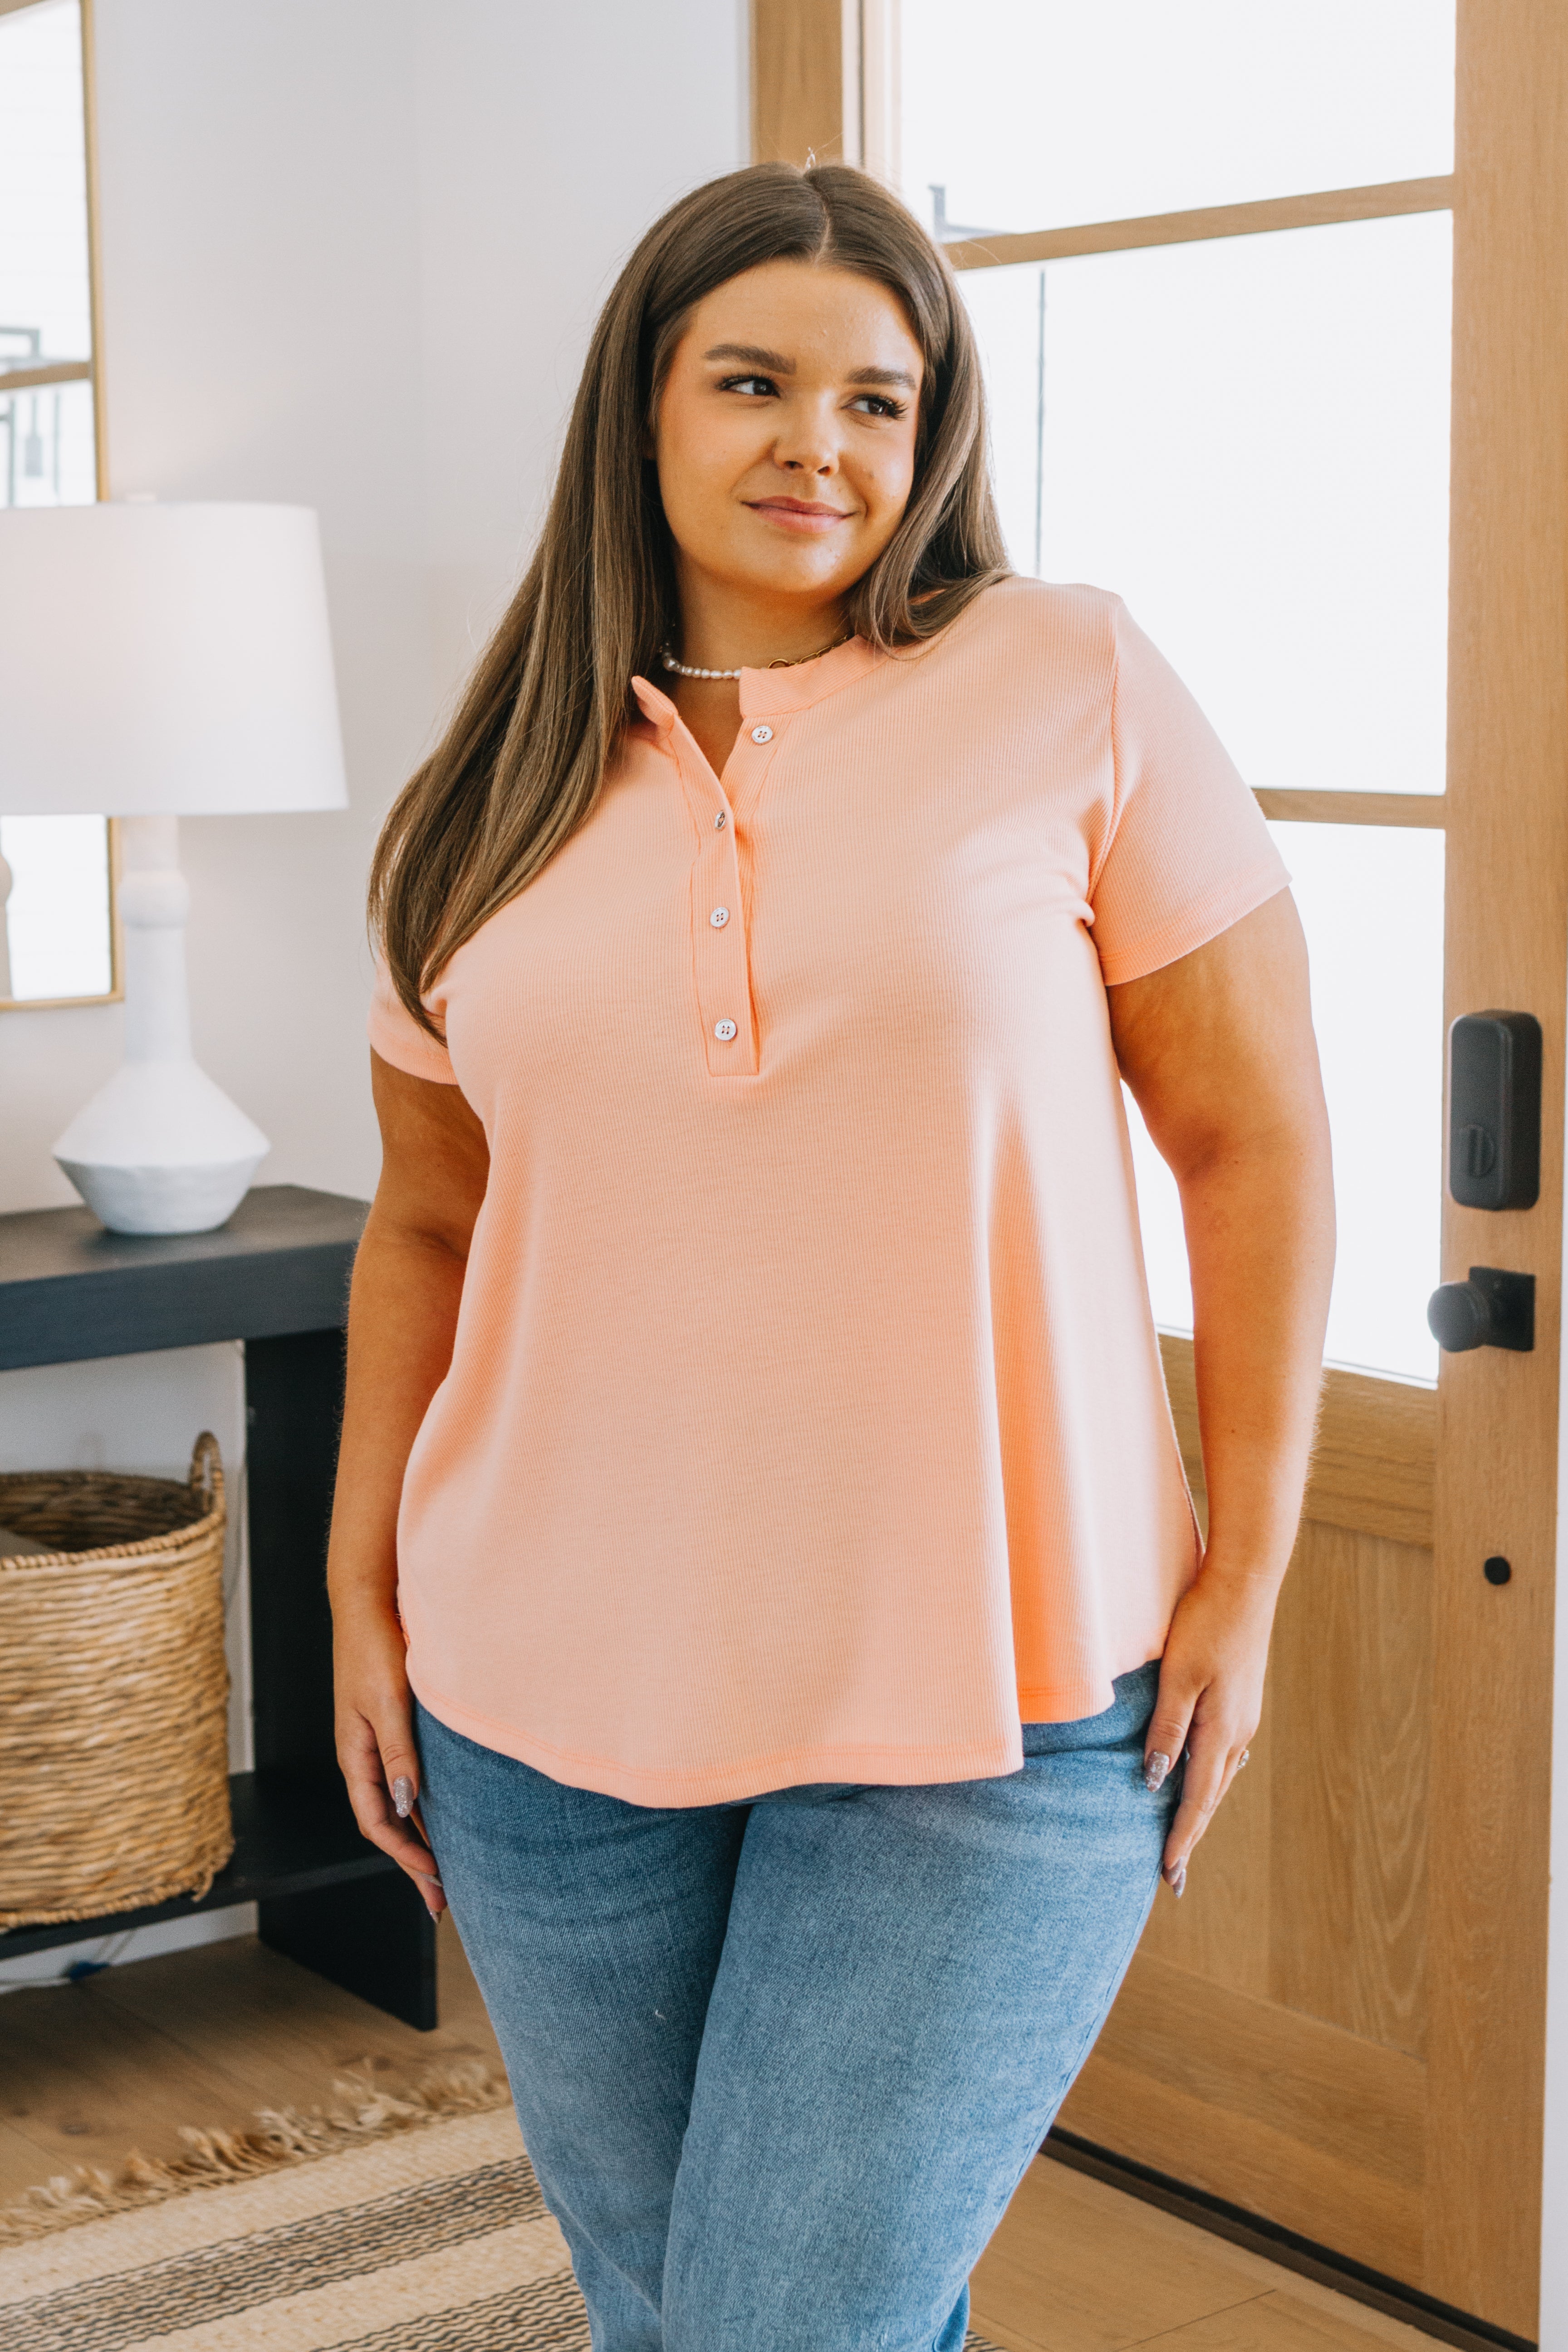 Tippy Top Ribbed Knit Henley - Lola Cerina Boutique